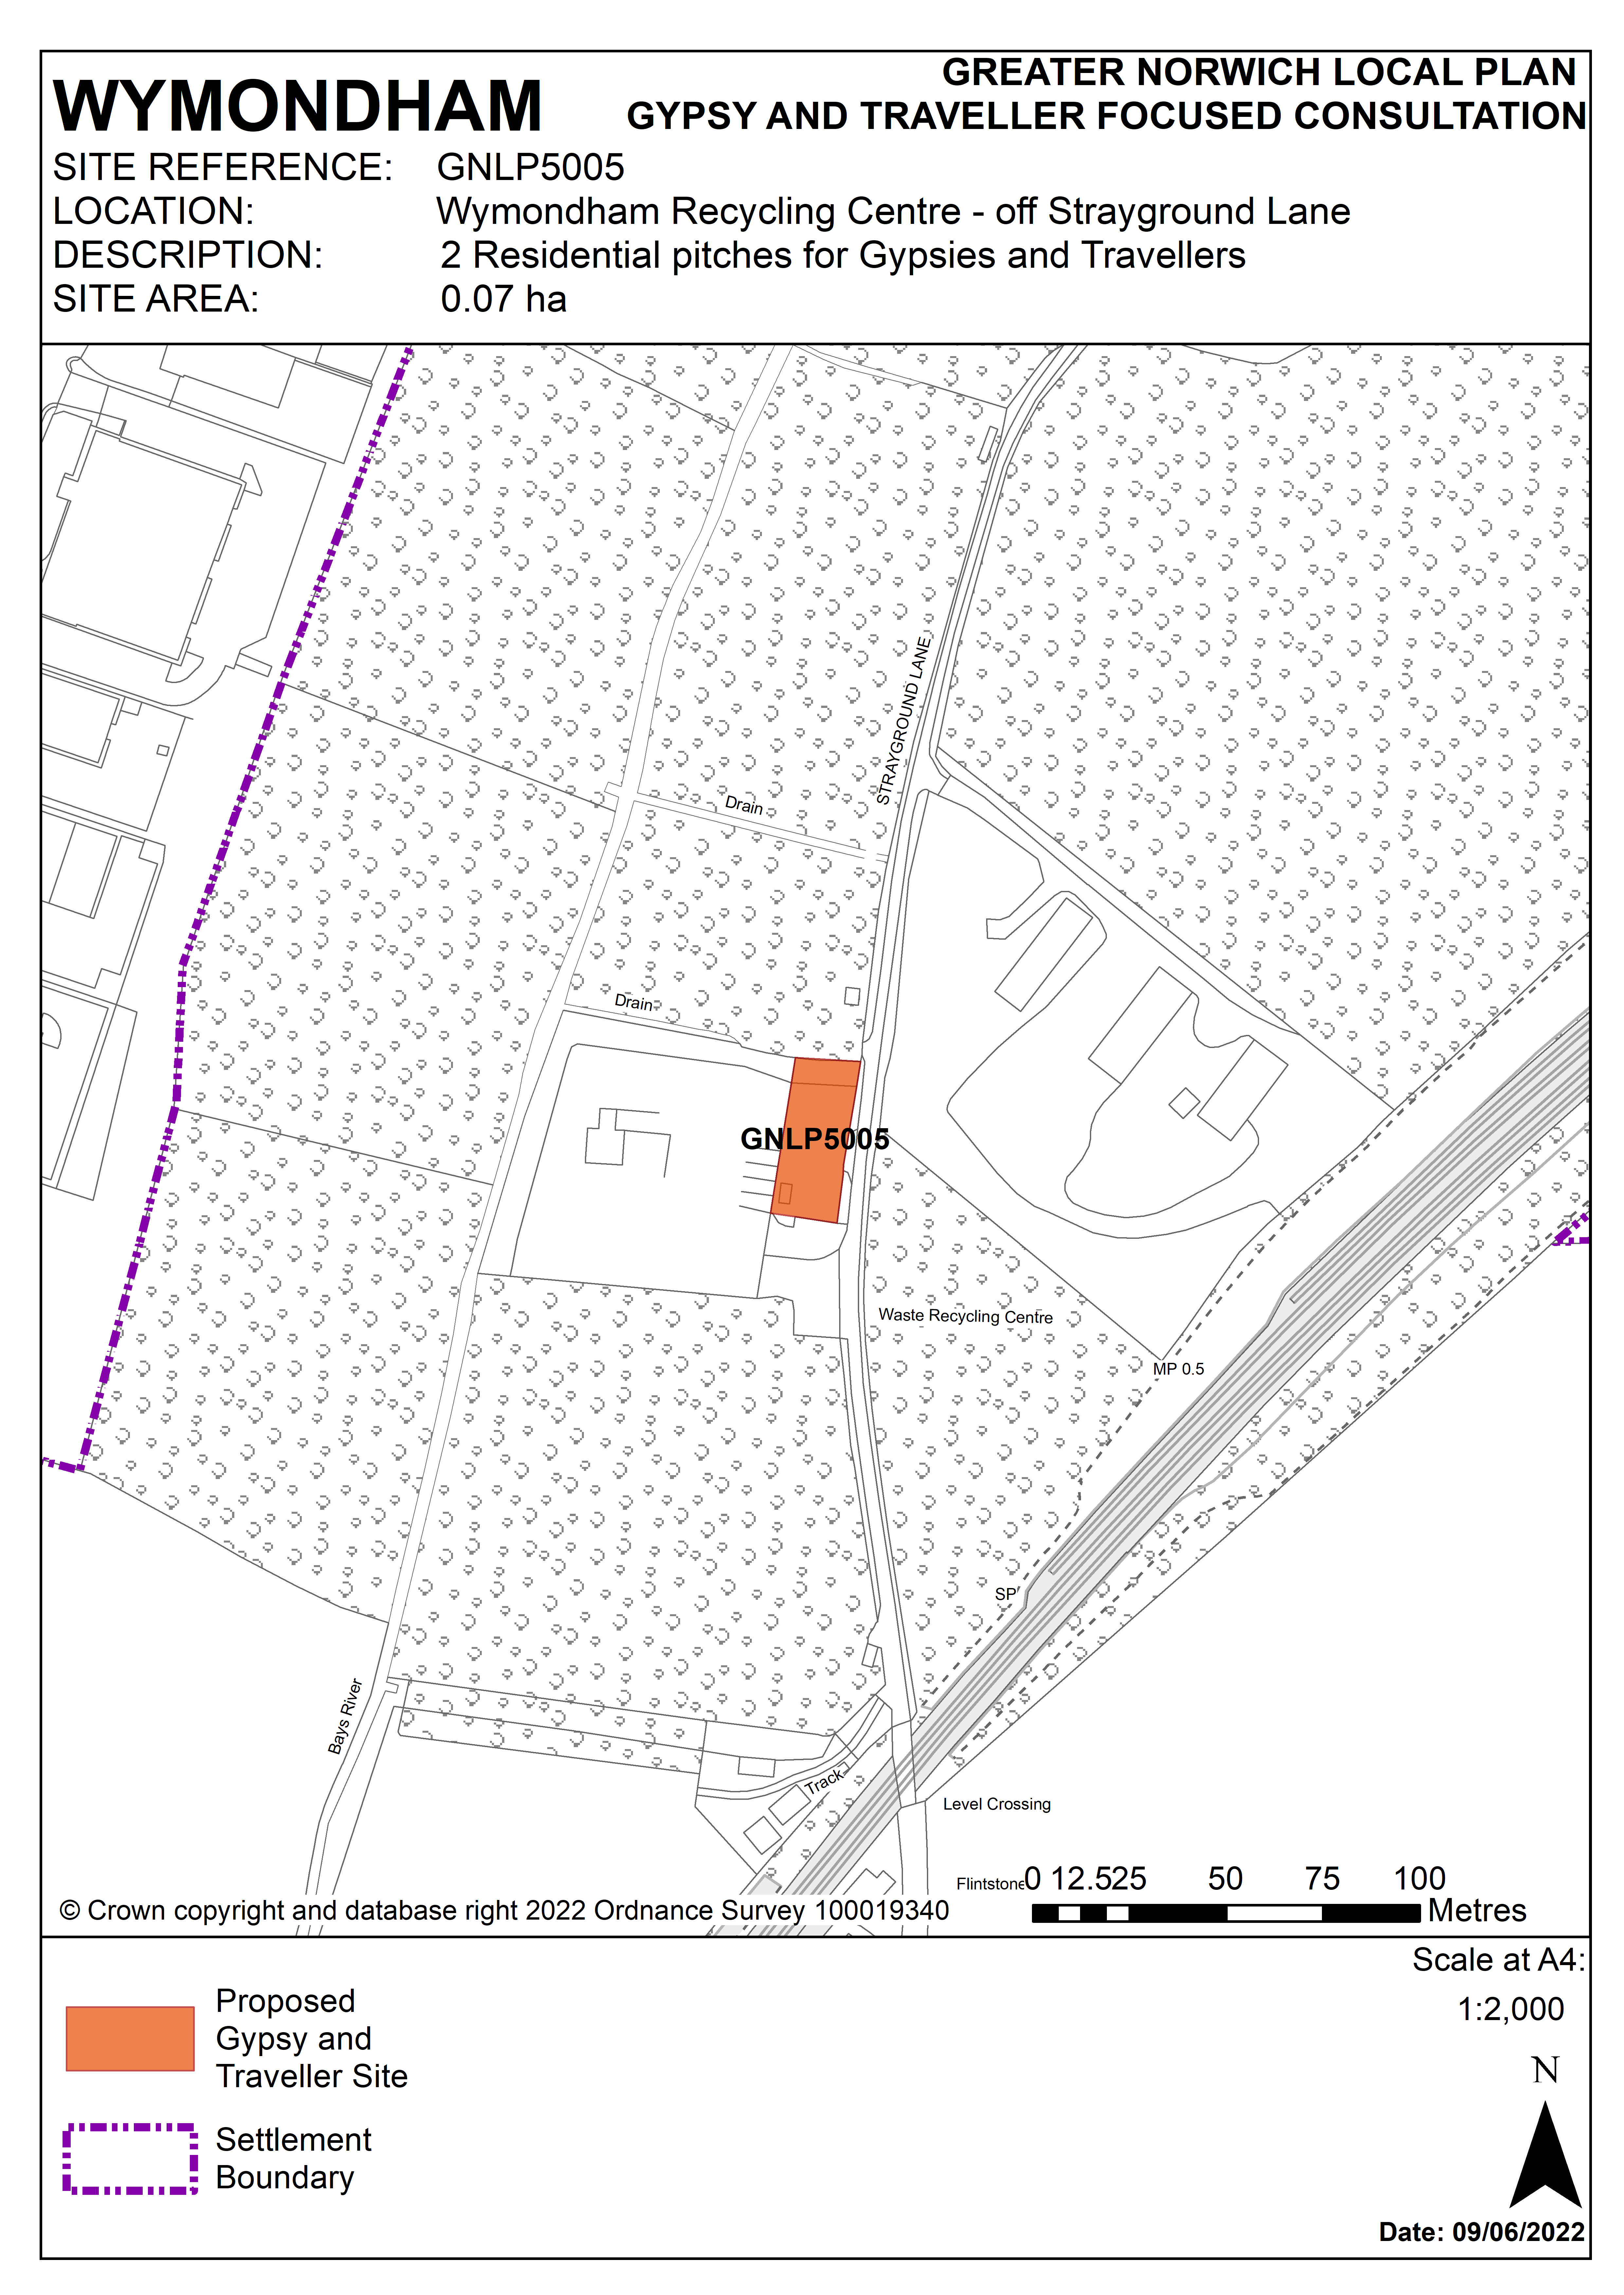 Map showing proposed Gypsy and Traveller site at Strayground Lane Wymondham Recycling Centre, Wymondham